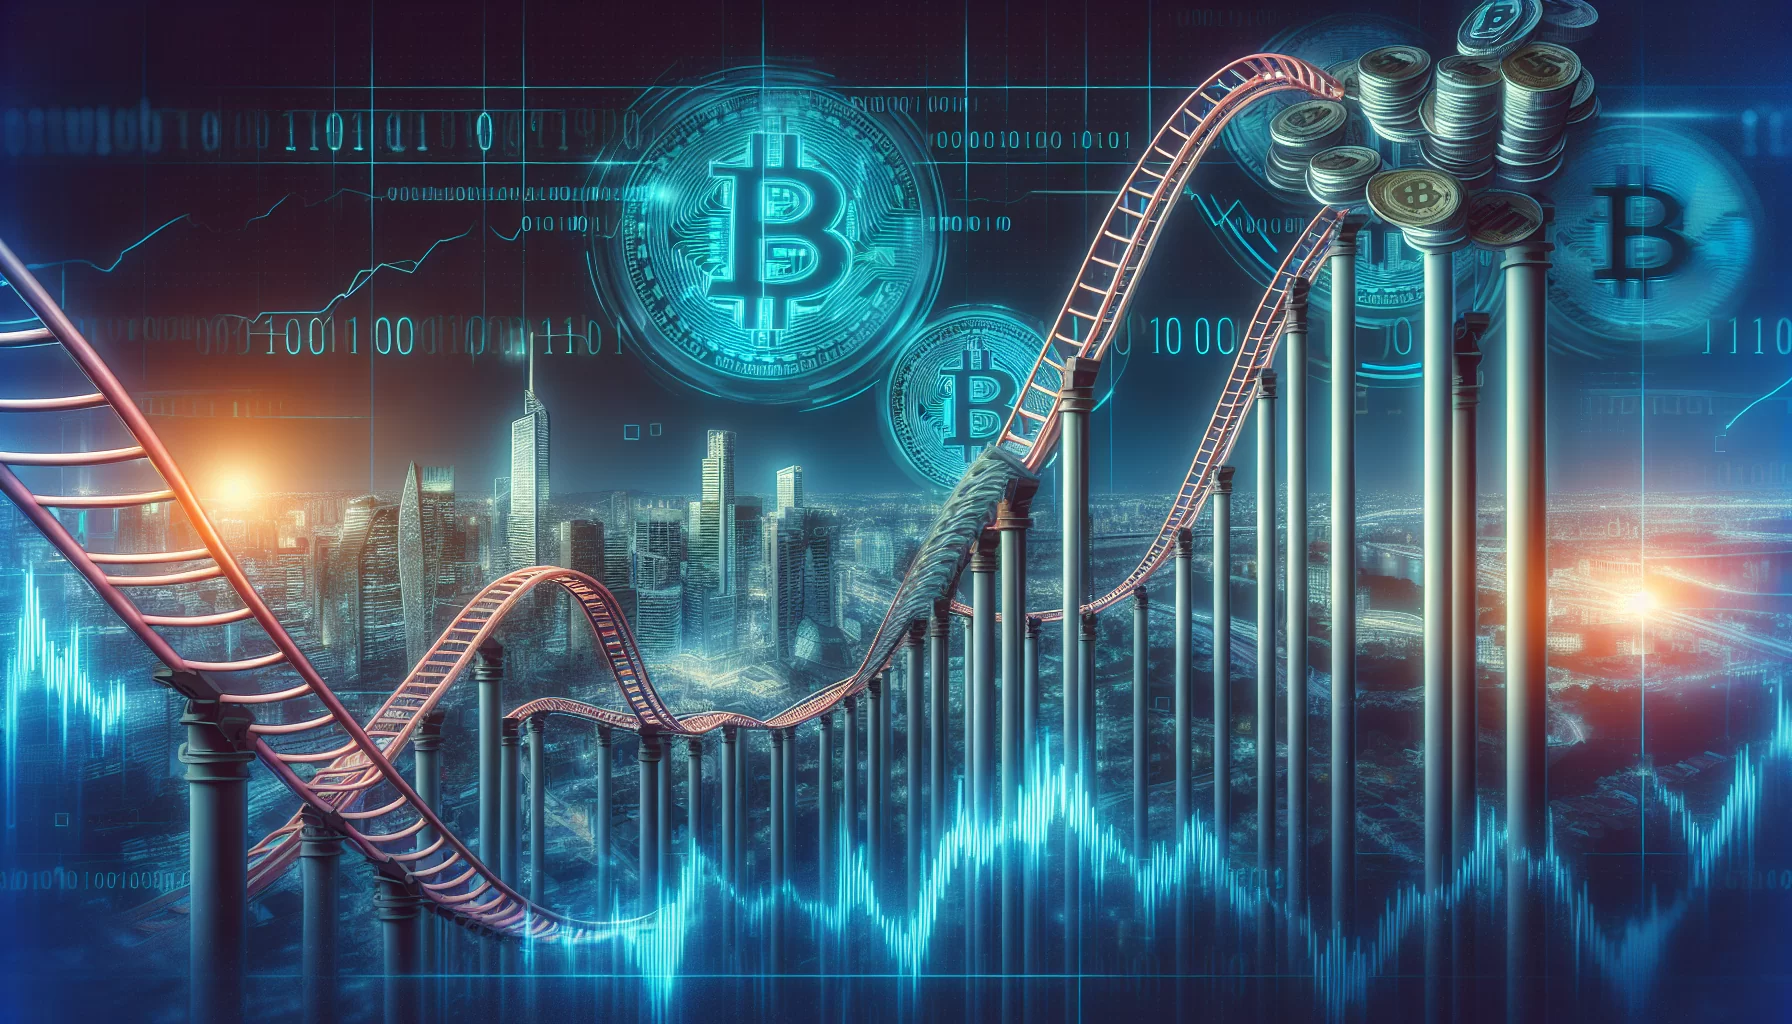 Bitcoin's turbulent ride: unpacking the recent volatility and future implications